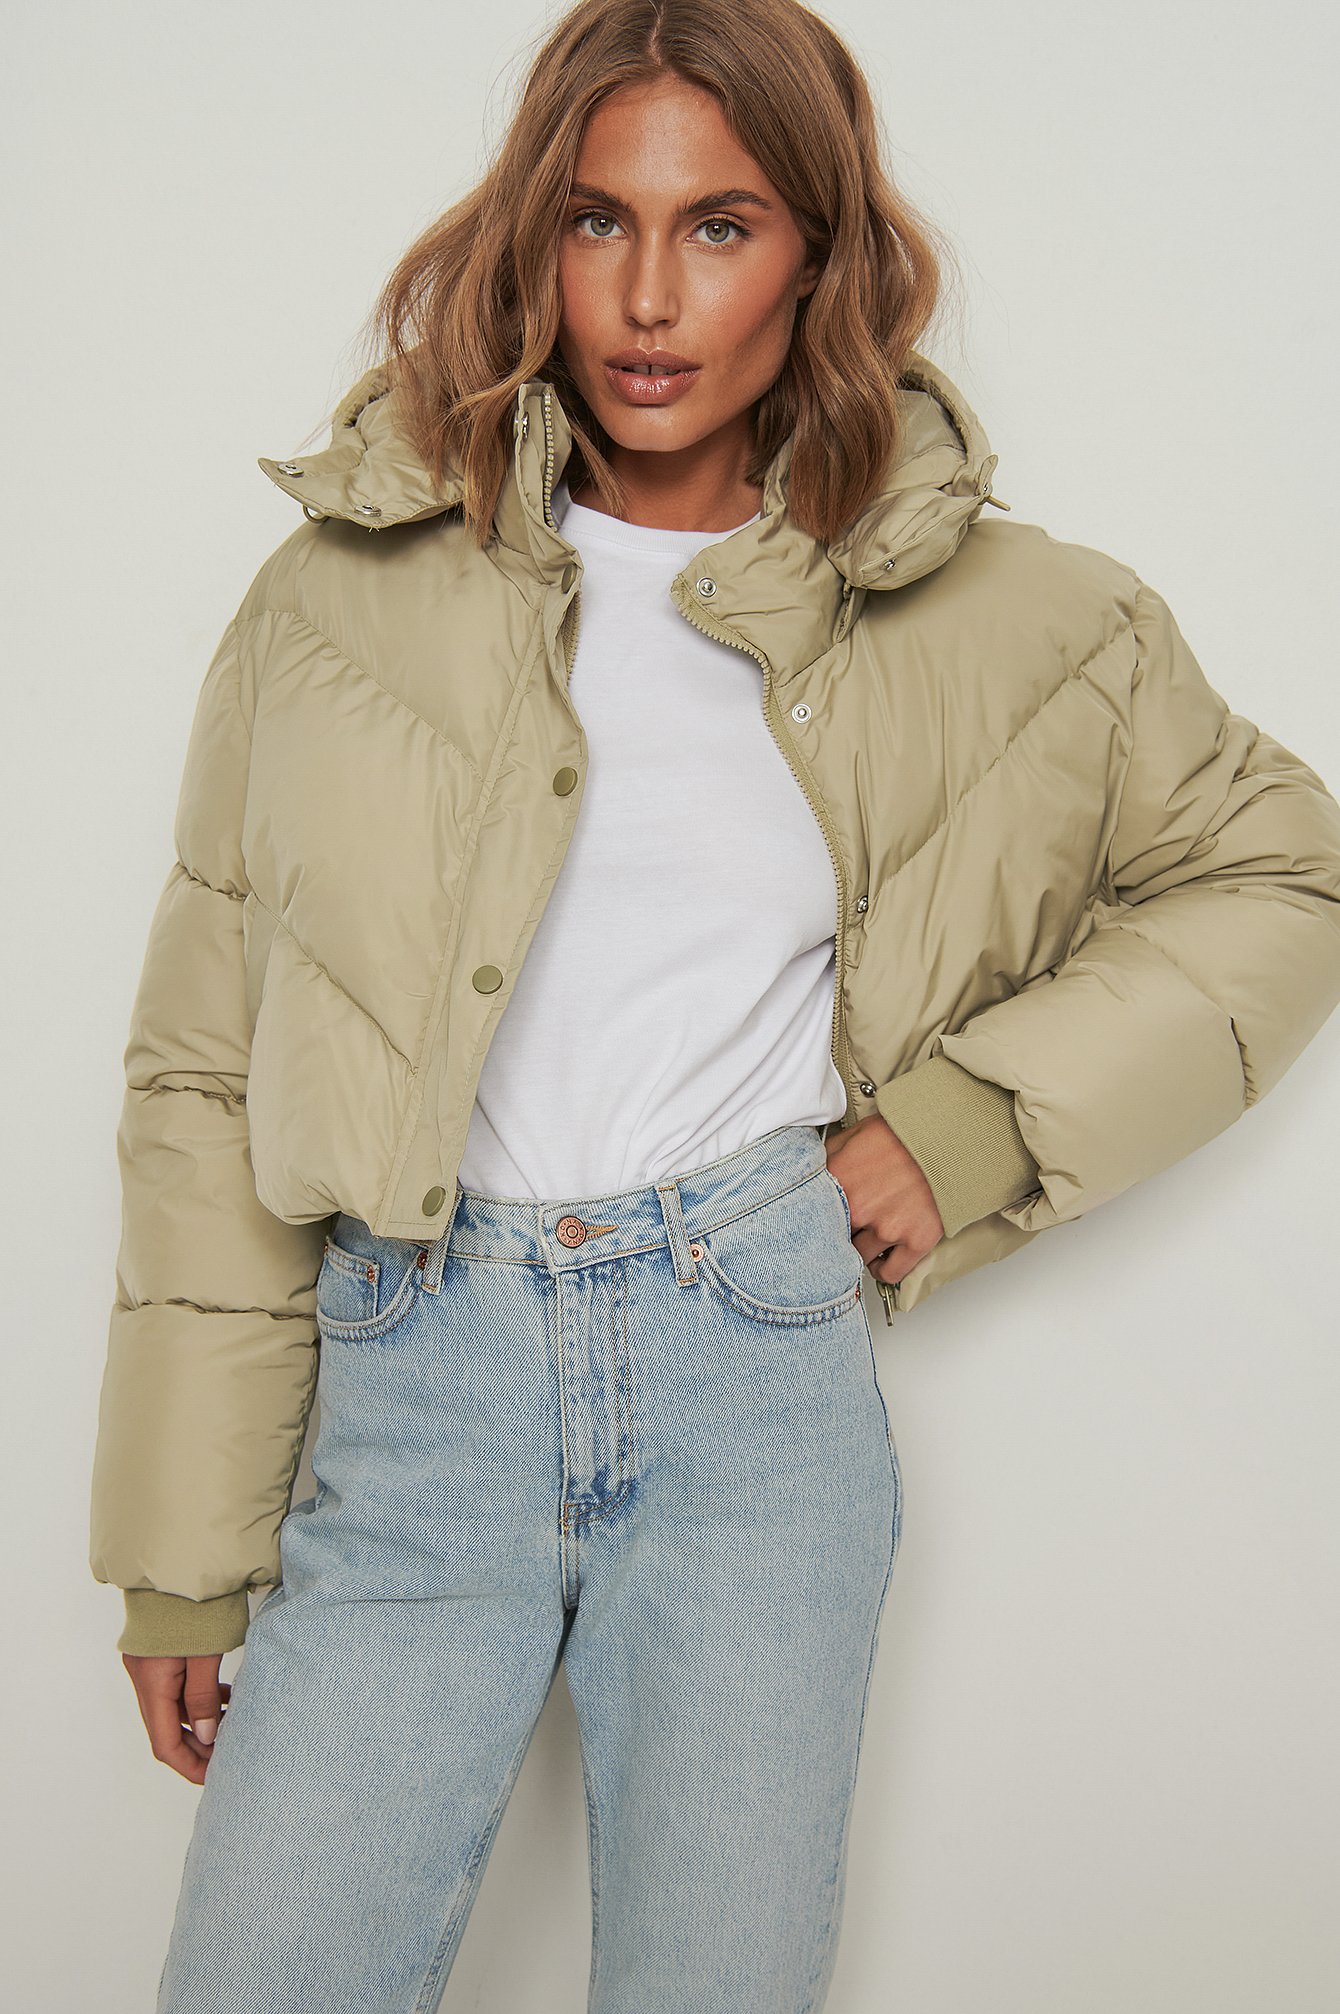 Short & Cropped Puffer Jackets for Women